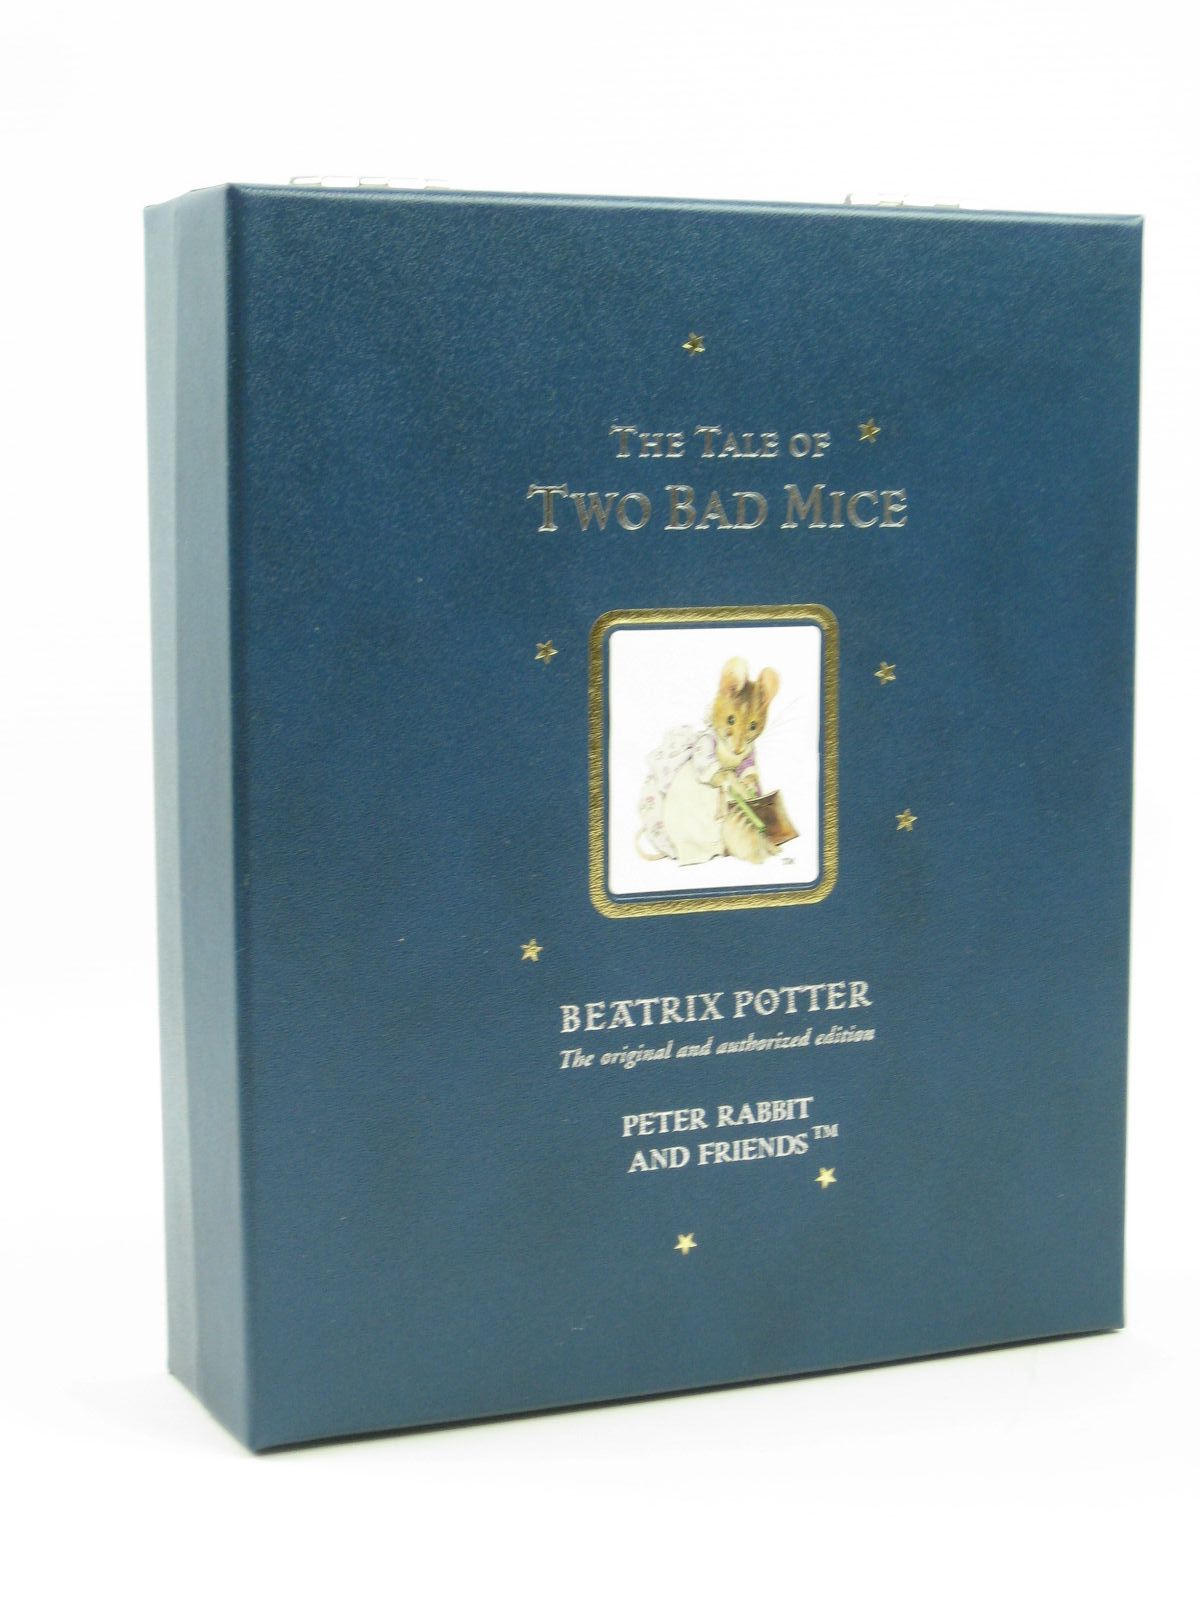 Photo of THE TALE OF TWO BAD MICE written by Potter, Beatrix illustrated by Potter, Beatrix published by Frederick Warne, The Penguin Group (STOCK CODE: 1316343)  for sale by Stella & Rose's Books